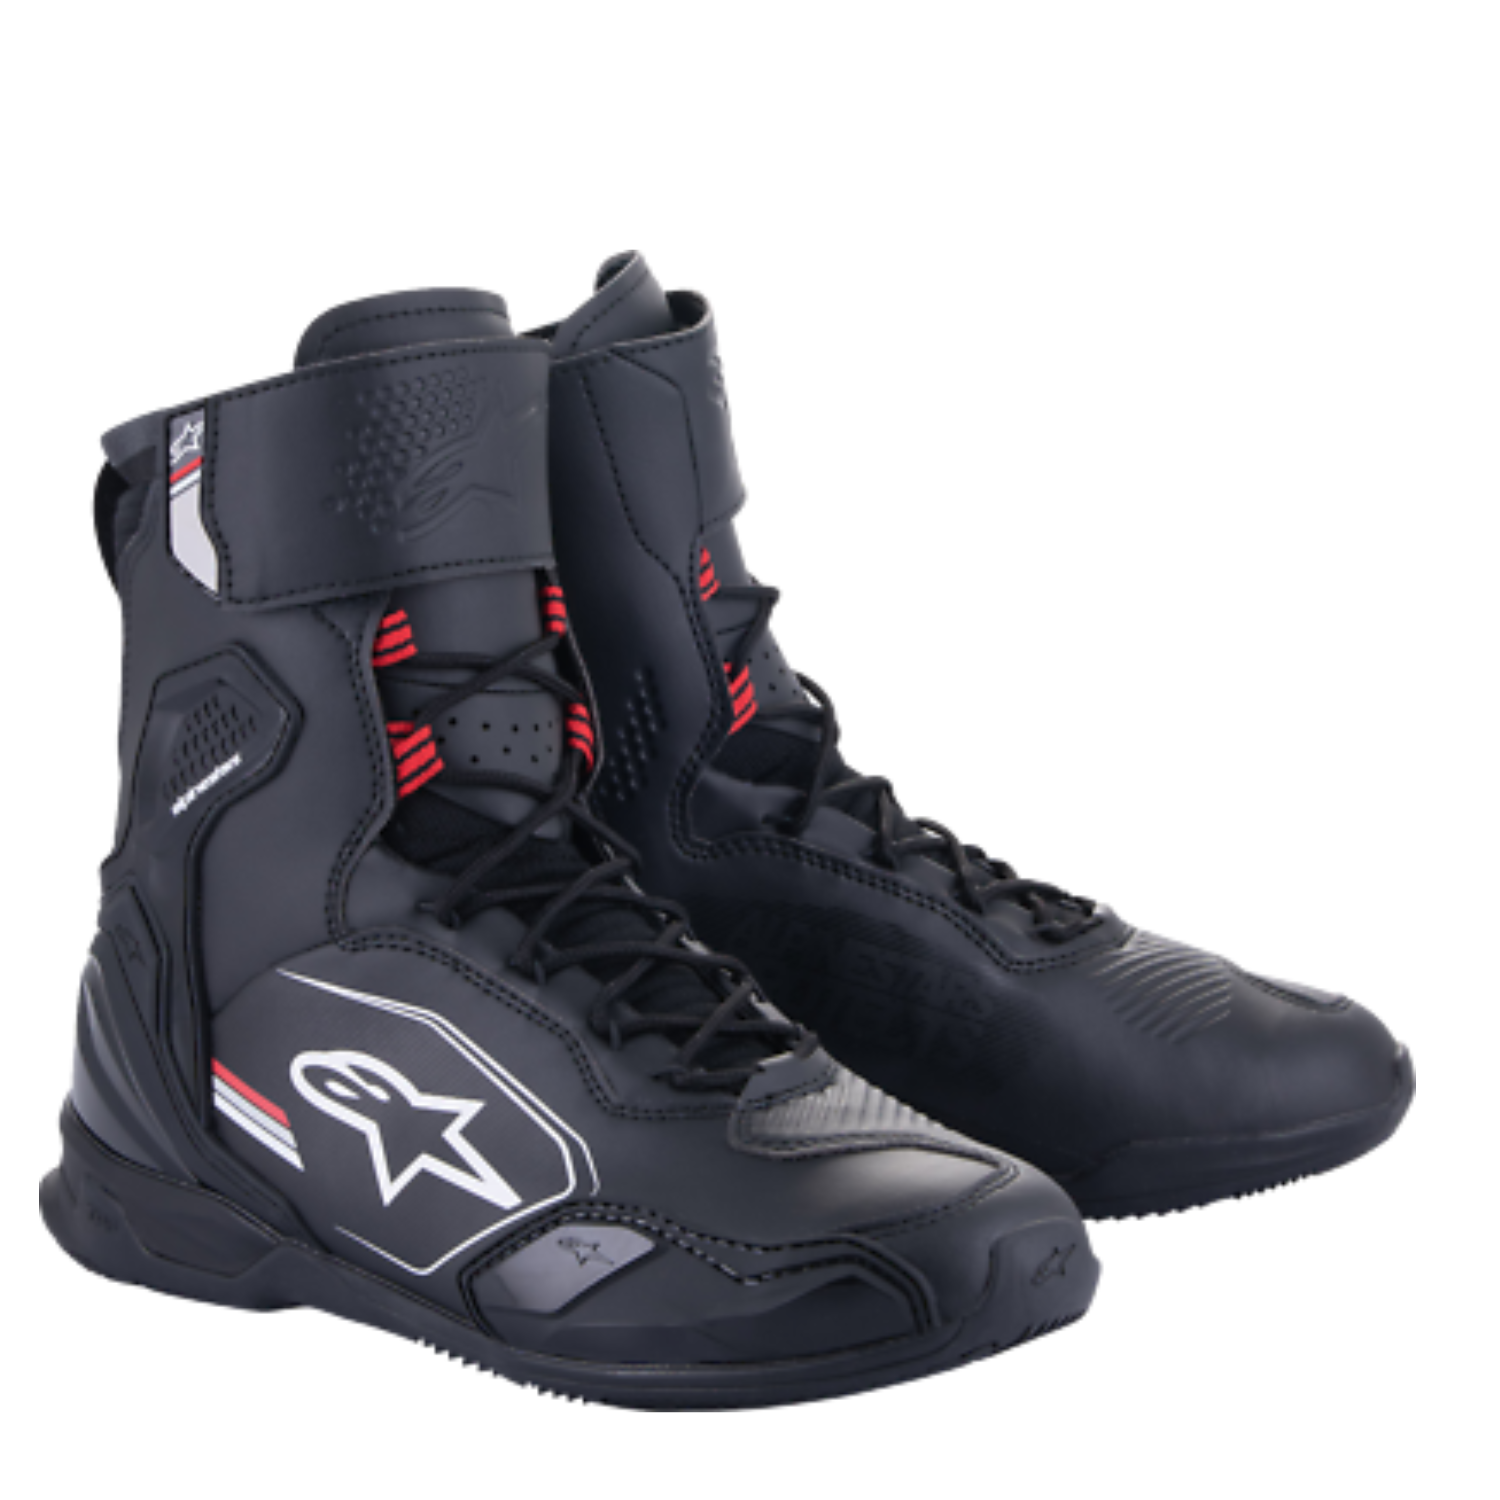 Image of Alpinestars Superfaster Shoes Black Gray Bright Red Size US 95 EN